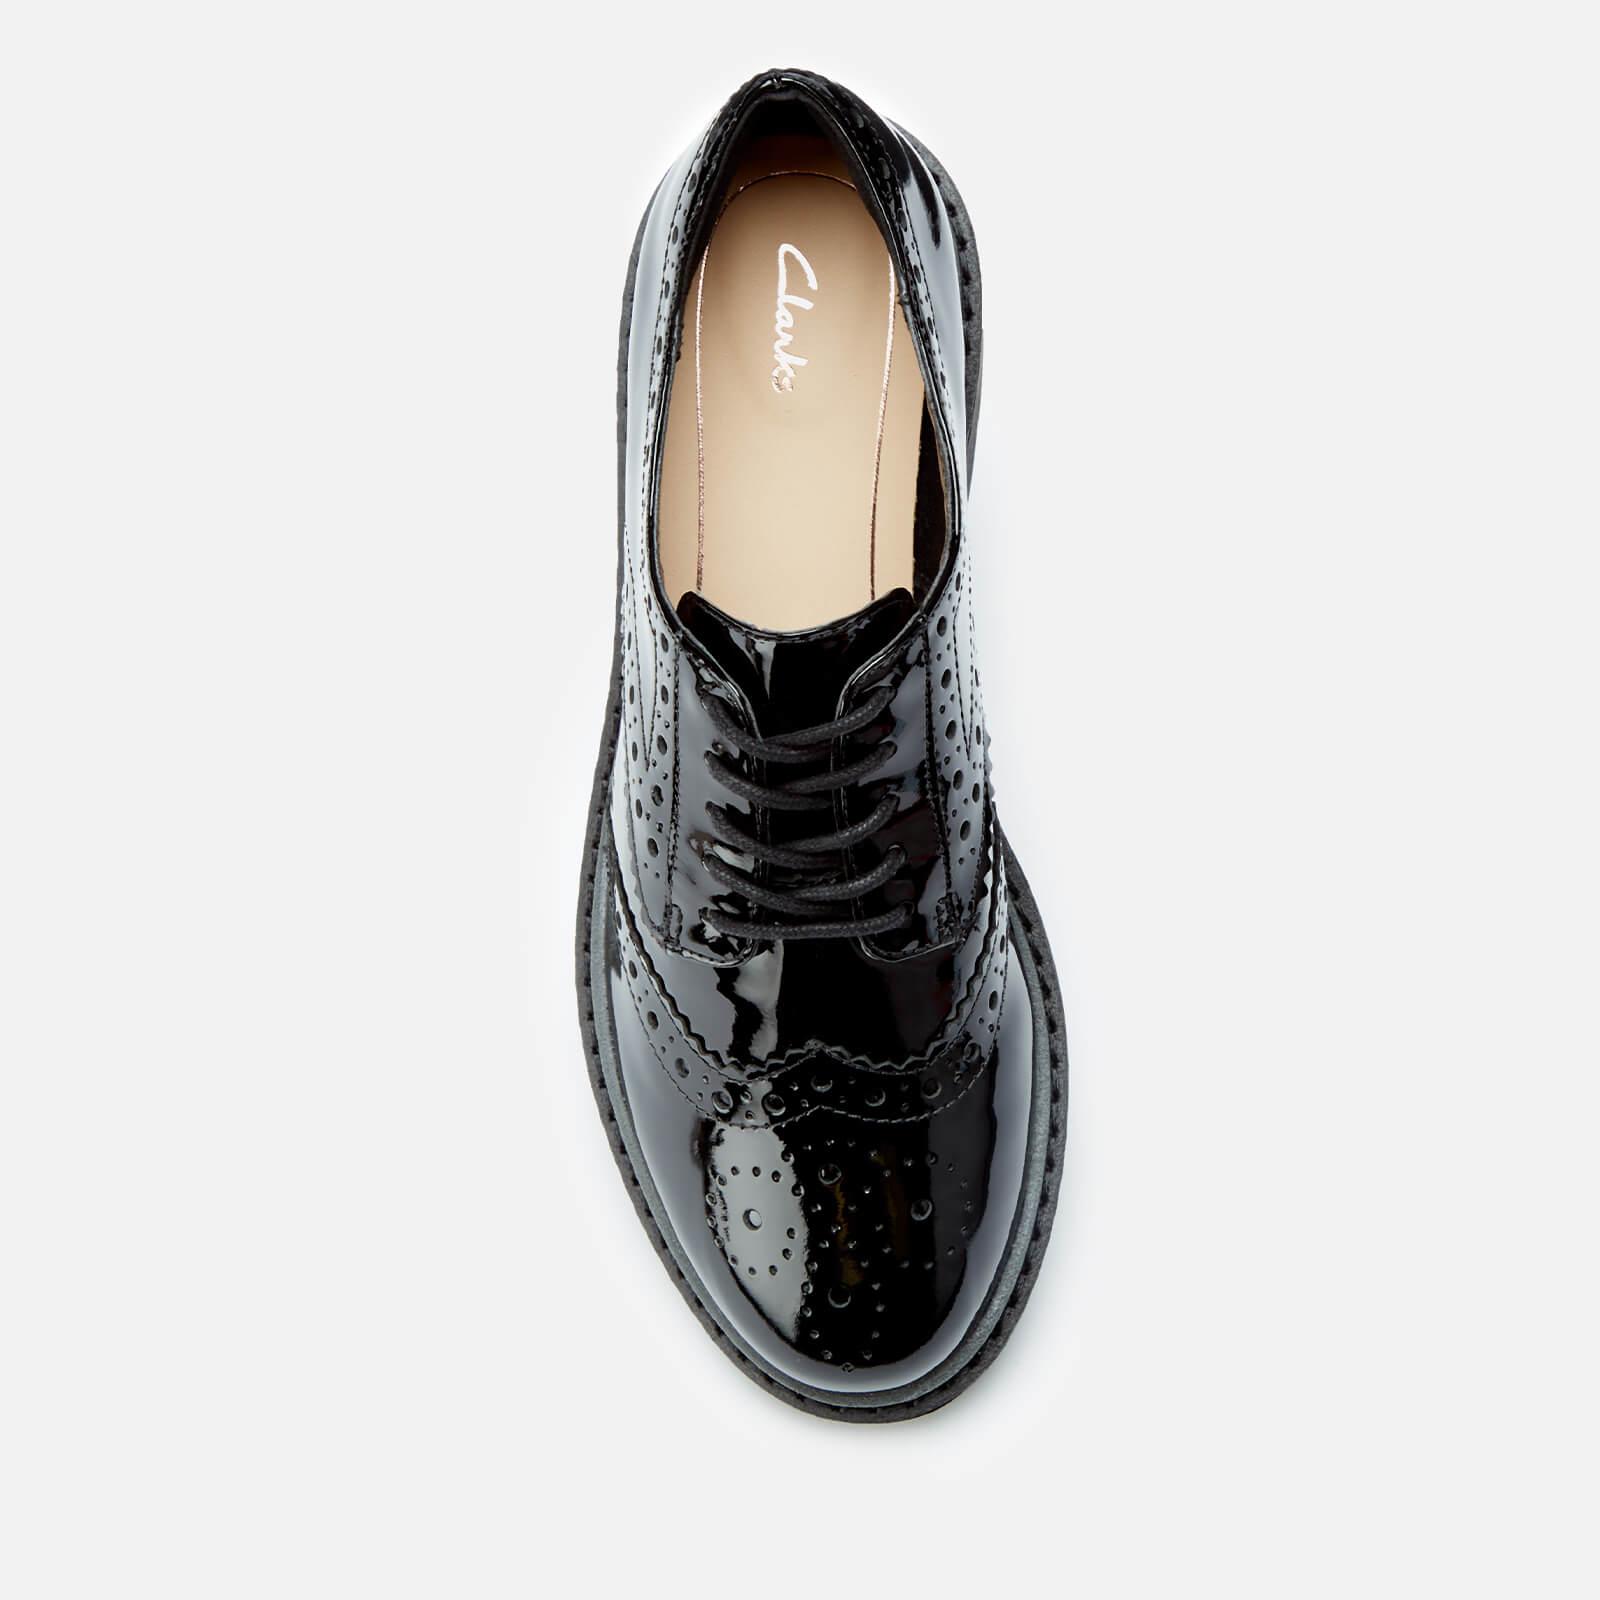 clarks patent brogues